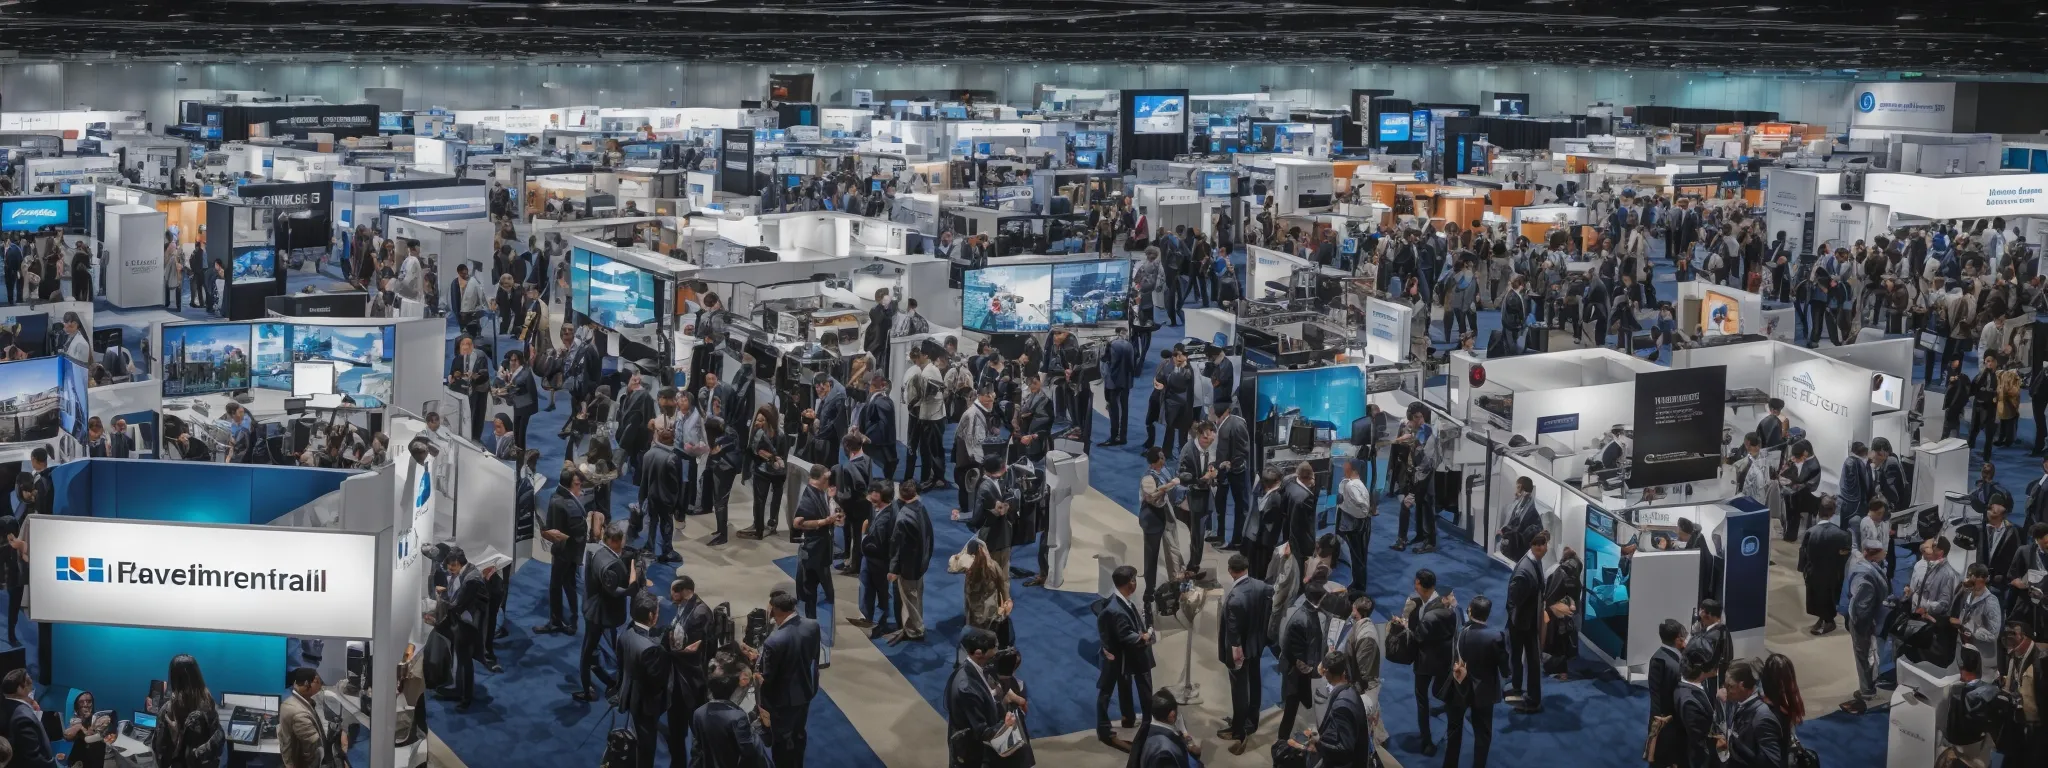 a panoramic view of a bustling tech expo floor with diverse interactive booths focused on digital marketing solutions.